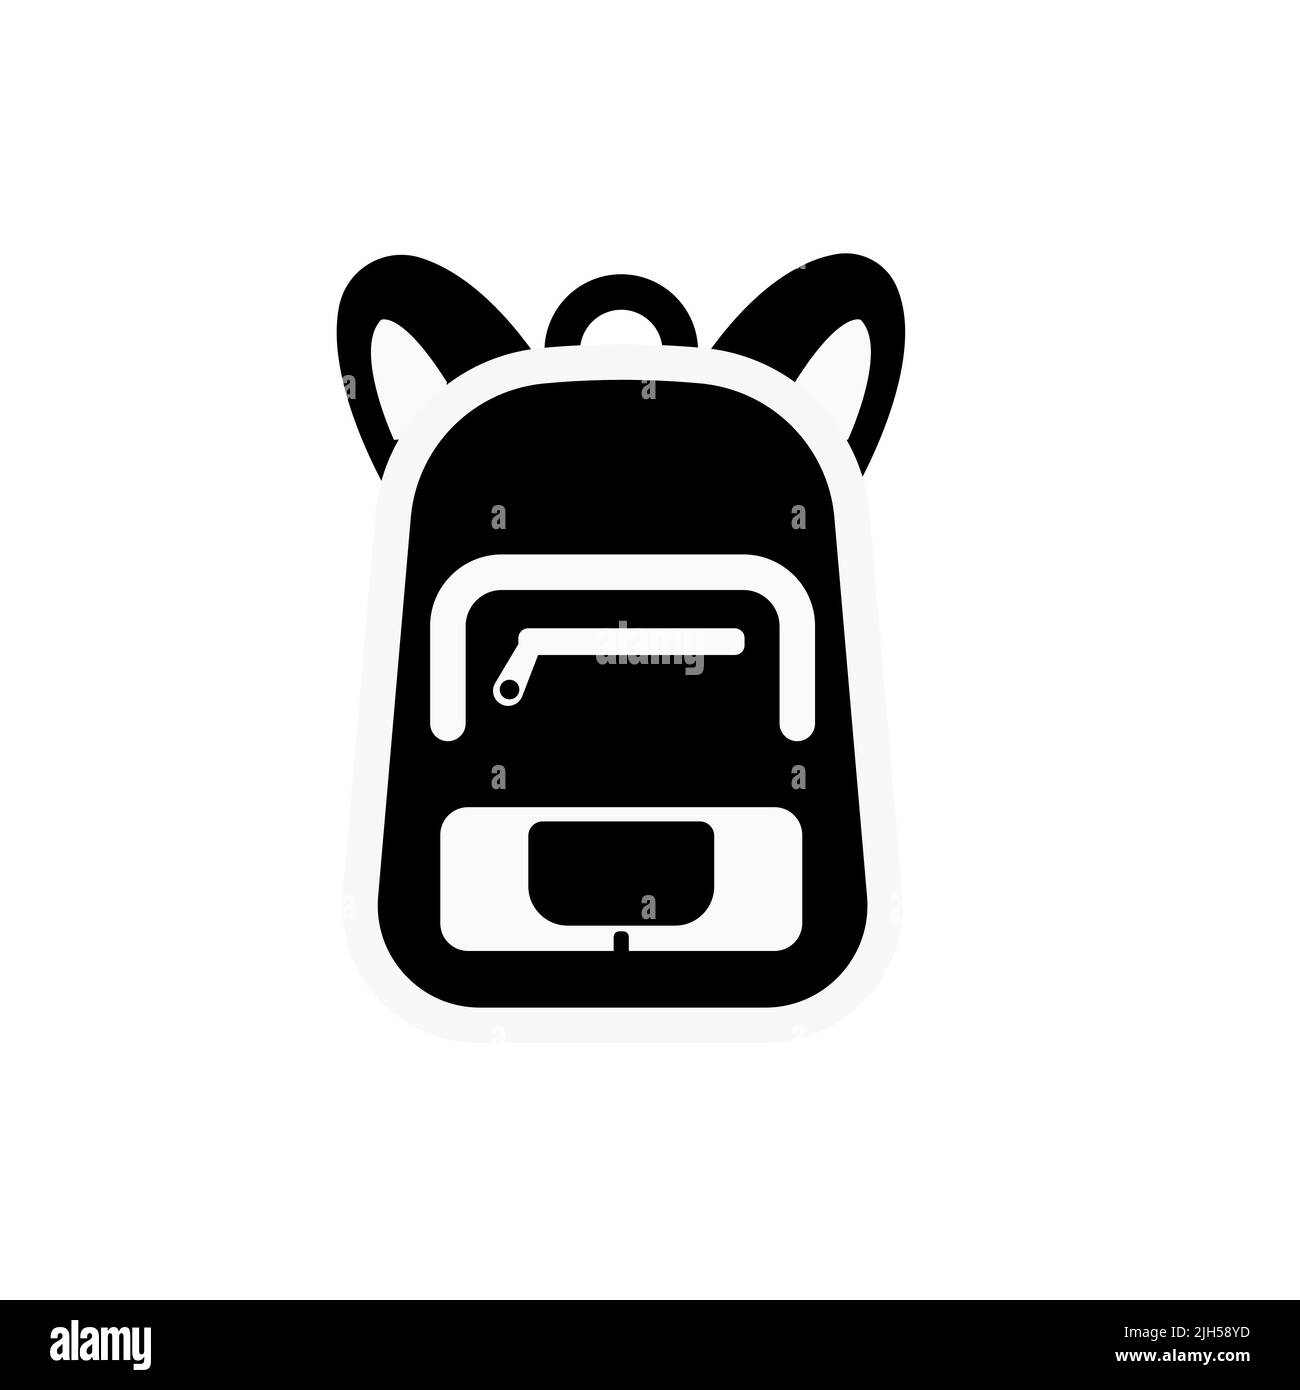 School Bag vector icon symbol. Creative sign from education icons collection. Filled flat School Bag icon for computer and mobile Stock Vector